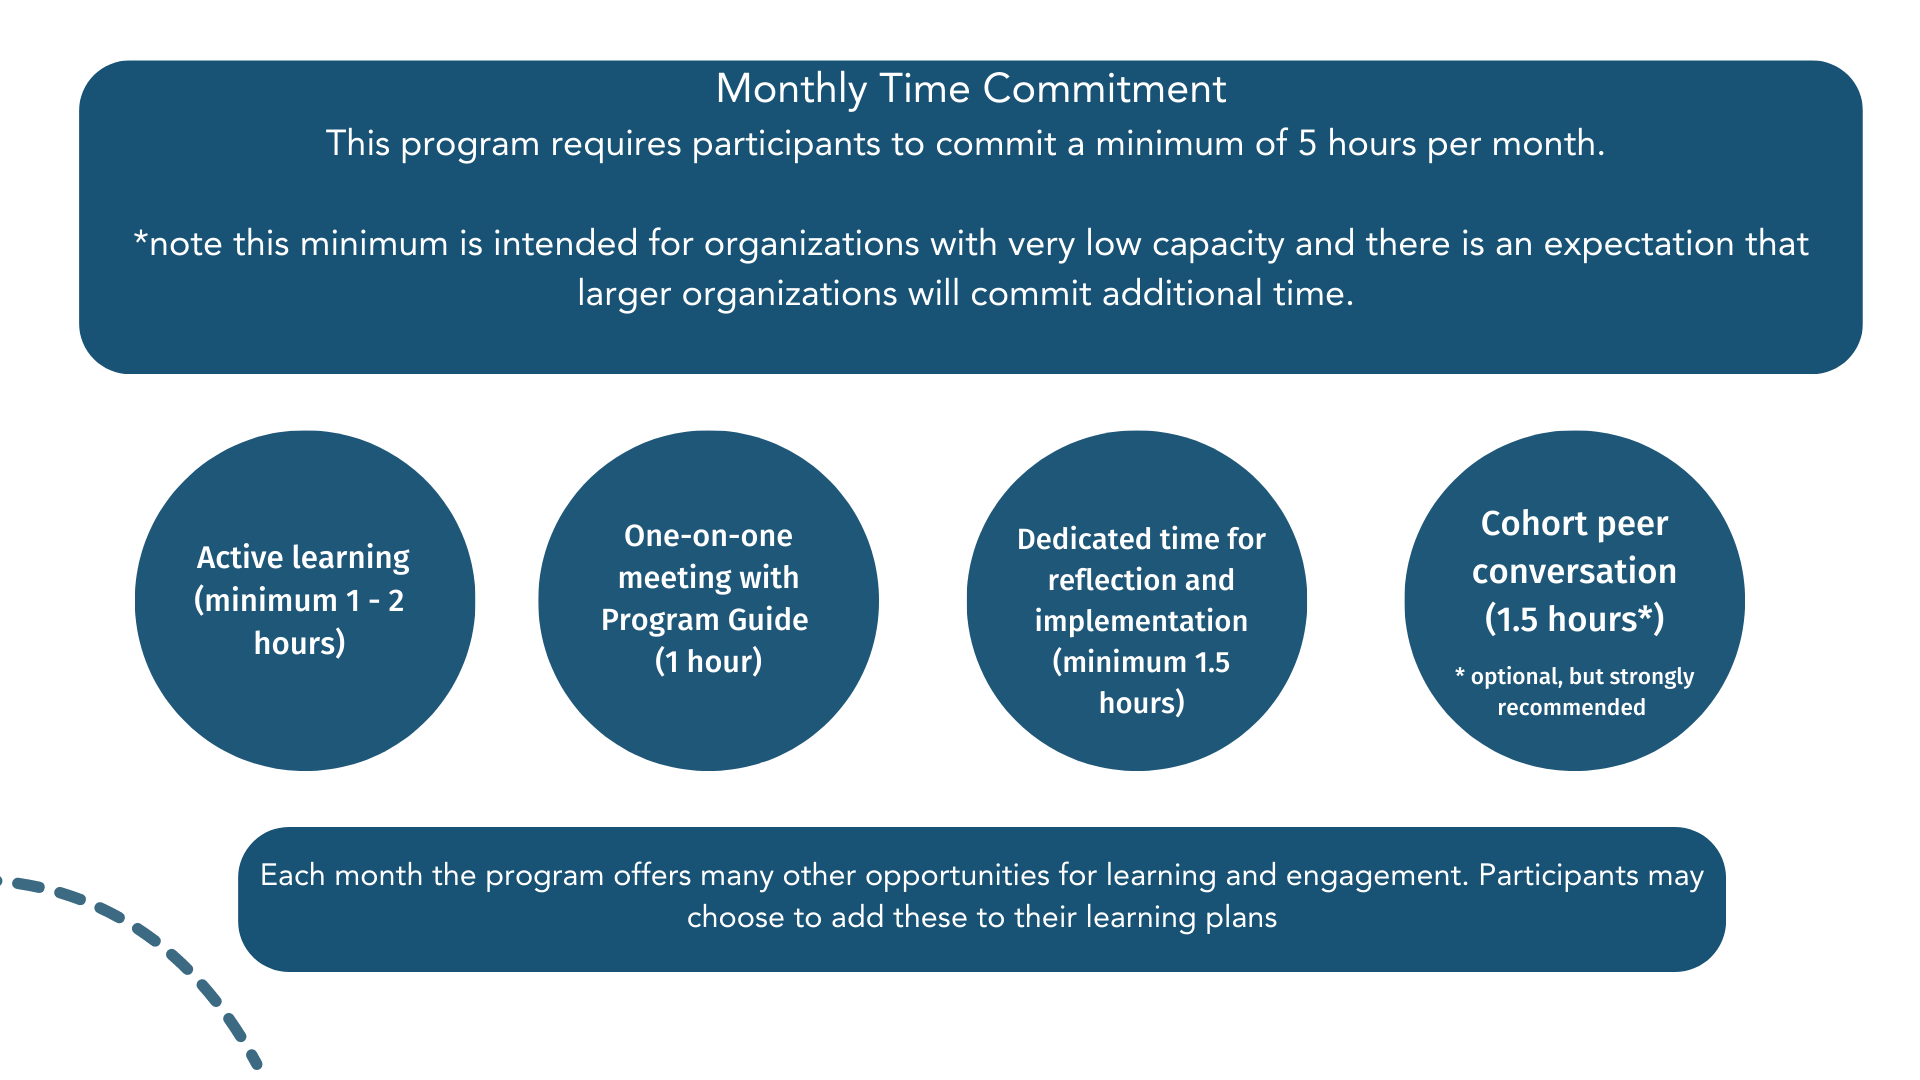 1. Active learning  (minimum 1 - 2 hours) 2. Dedicated time for reflection and implementation (minimum 1.5 hours) 3. One-on-one meeting with Program Guide (1 hour) 4. Cohort peer conversation (1.5 hours) * optional, but strongly recommended that at least one of the participants join a cohort group. Each month the program offers many other opportunities for learning and engagement. Participants may choose to add these to their learning plans.